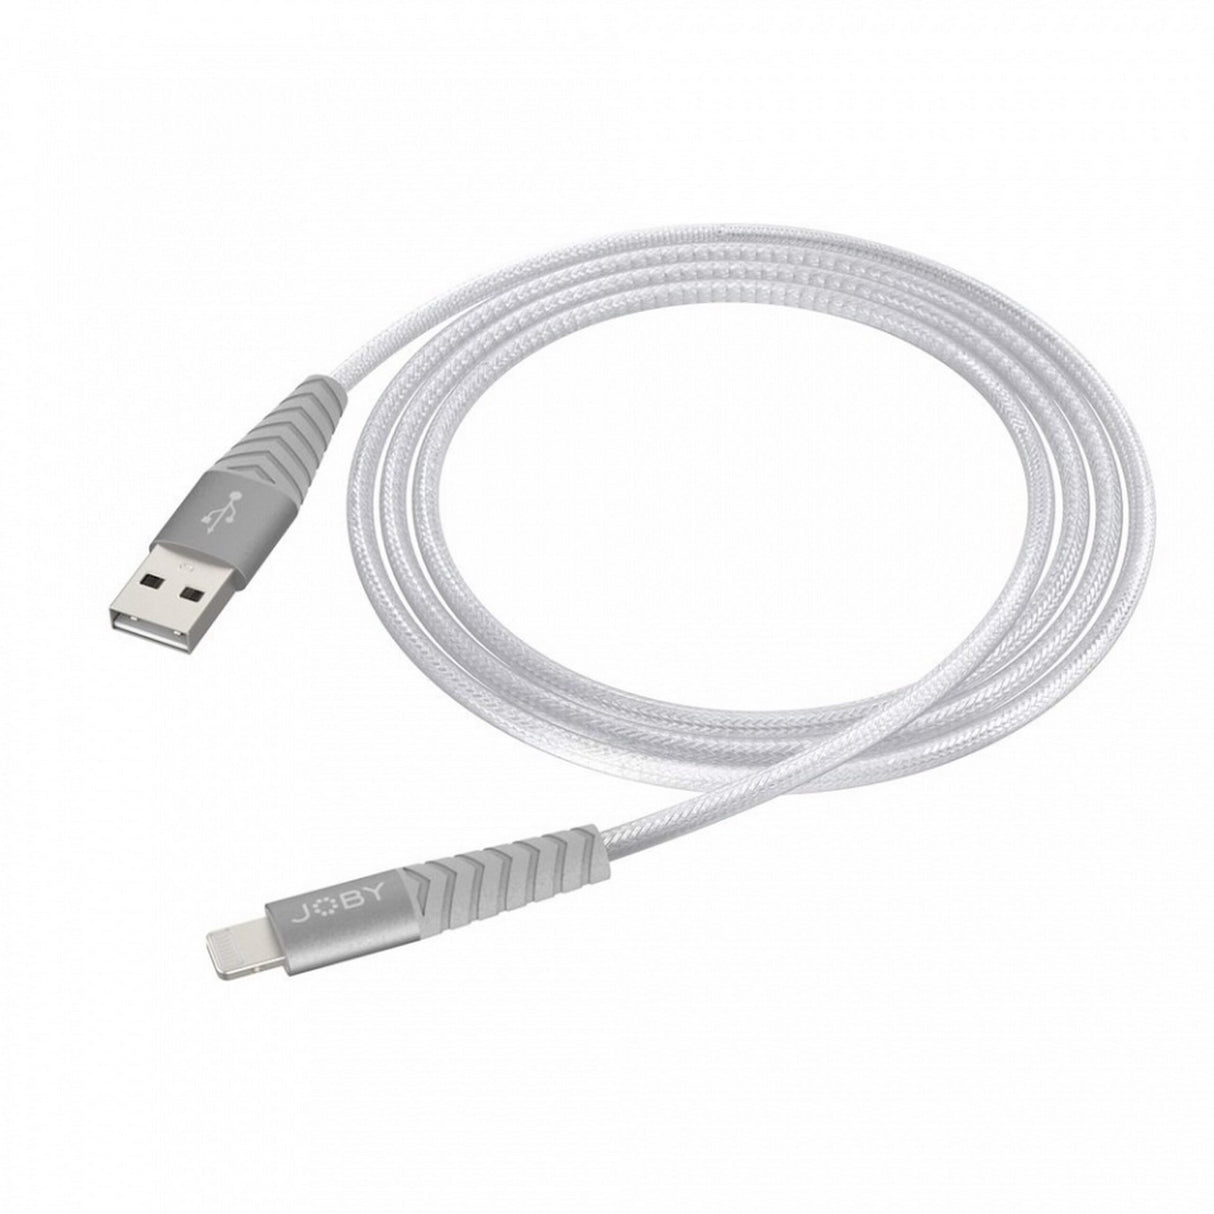 Joby JB01814 Charge and Sync Lightning Cable, 1.2-Meter, Silver